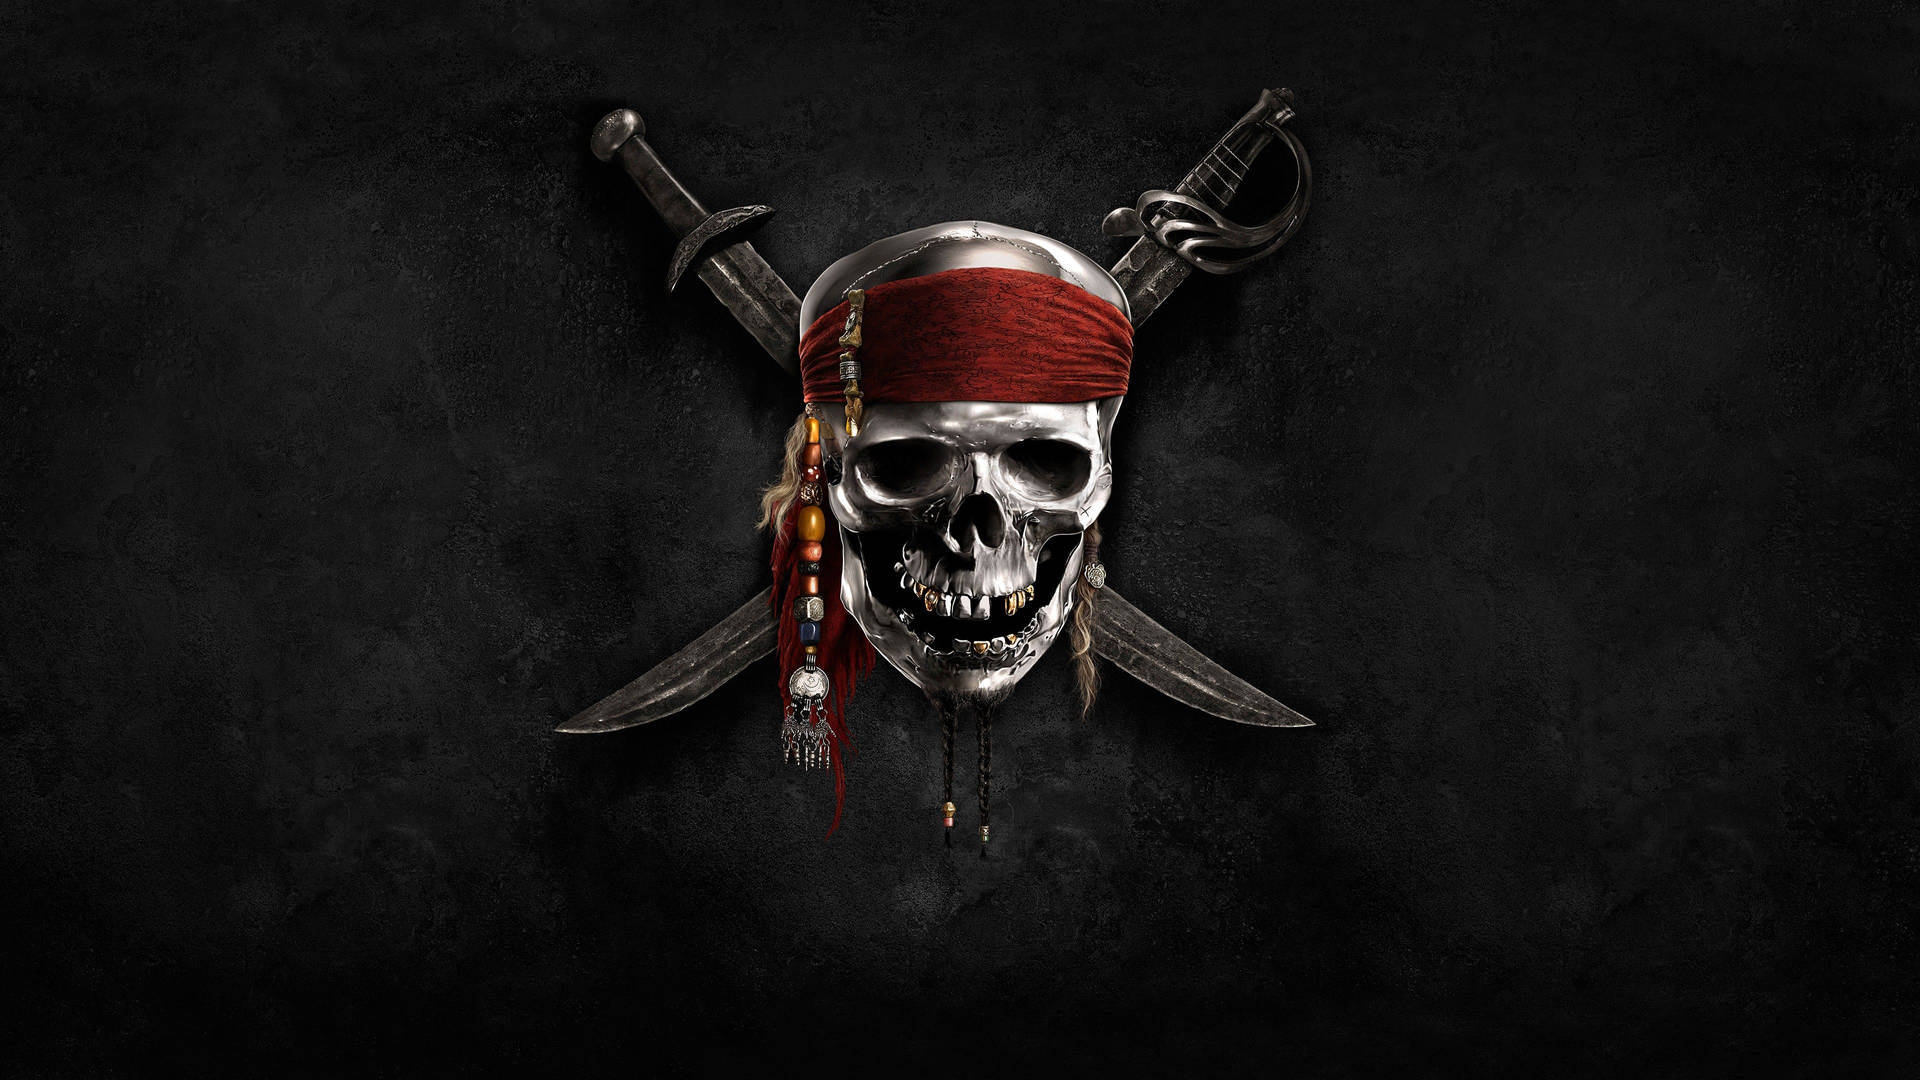 Pirate 3840X2160 Wallpaper and Background Image